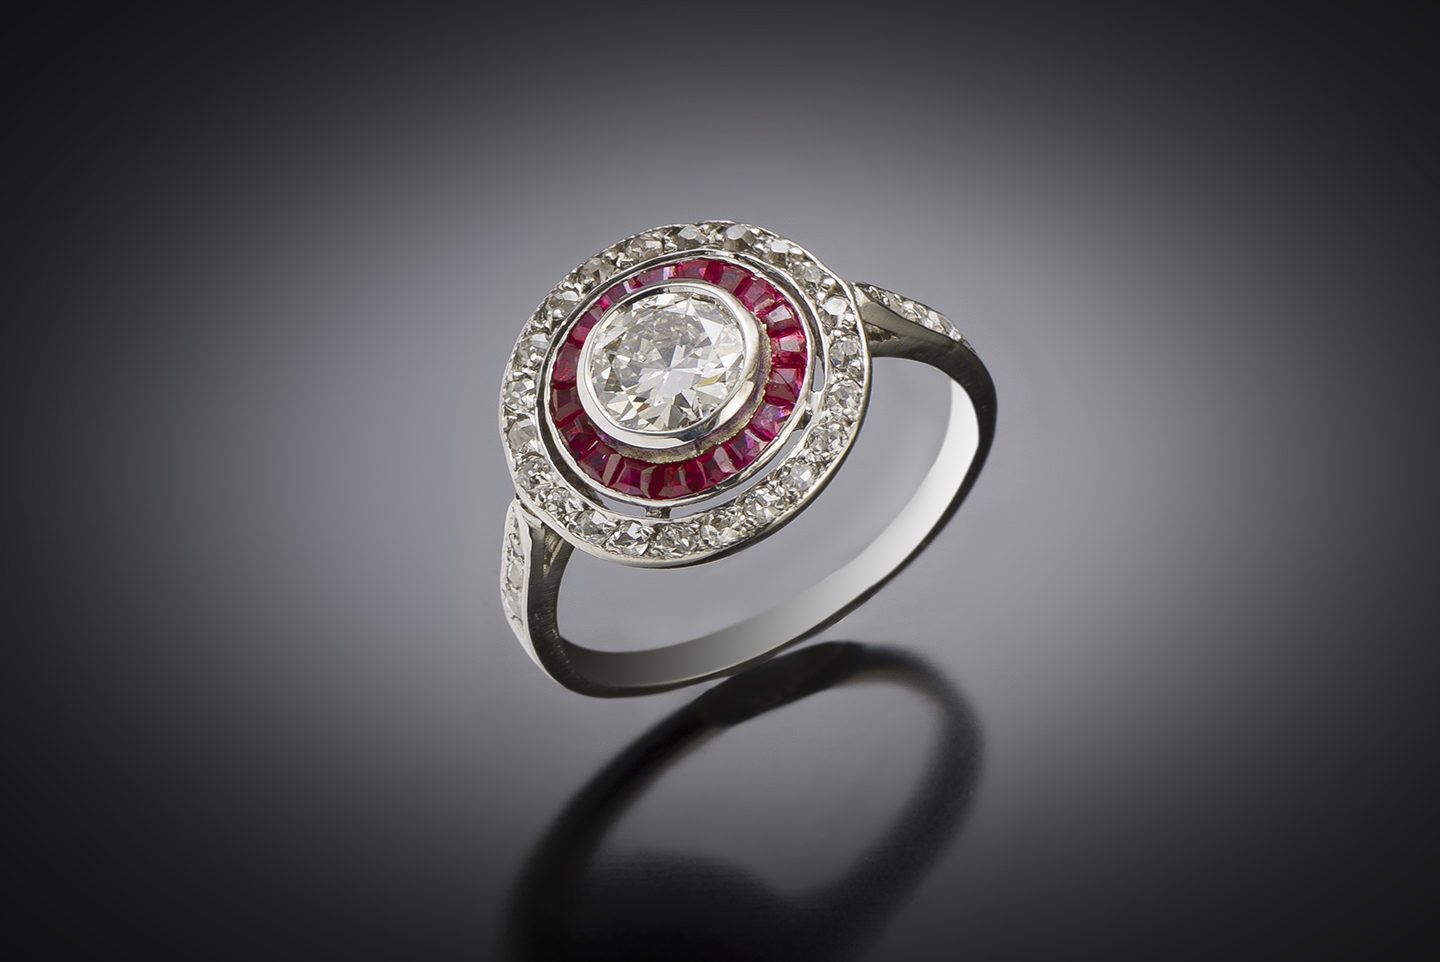 French Art Deco diamond ring (0.80 carat center) and ruby-1